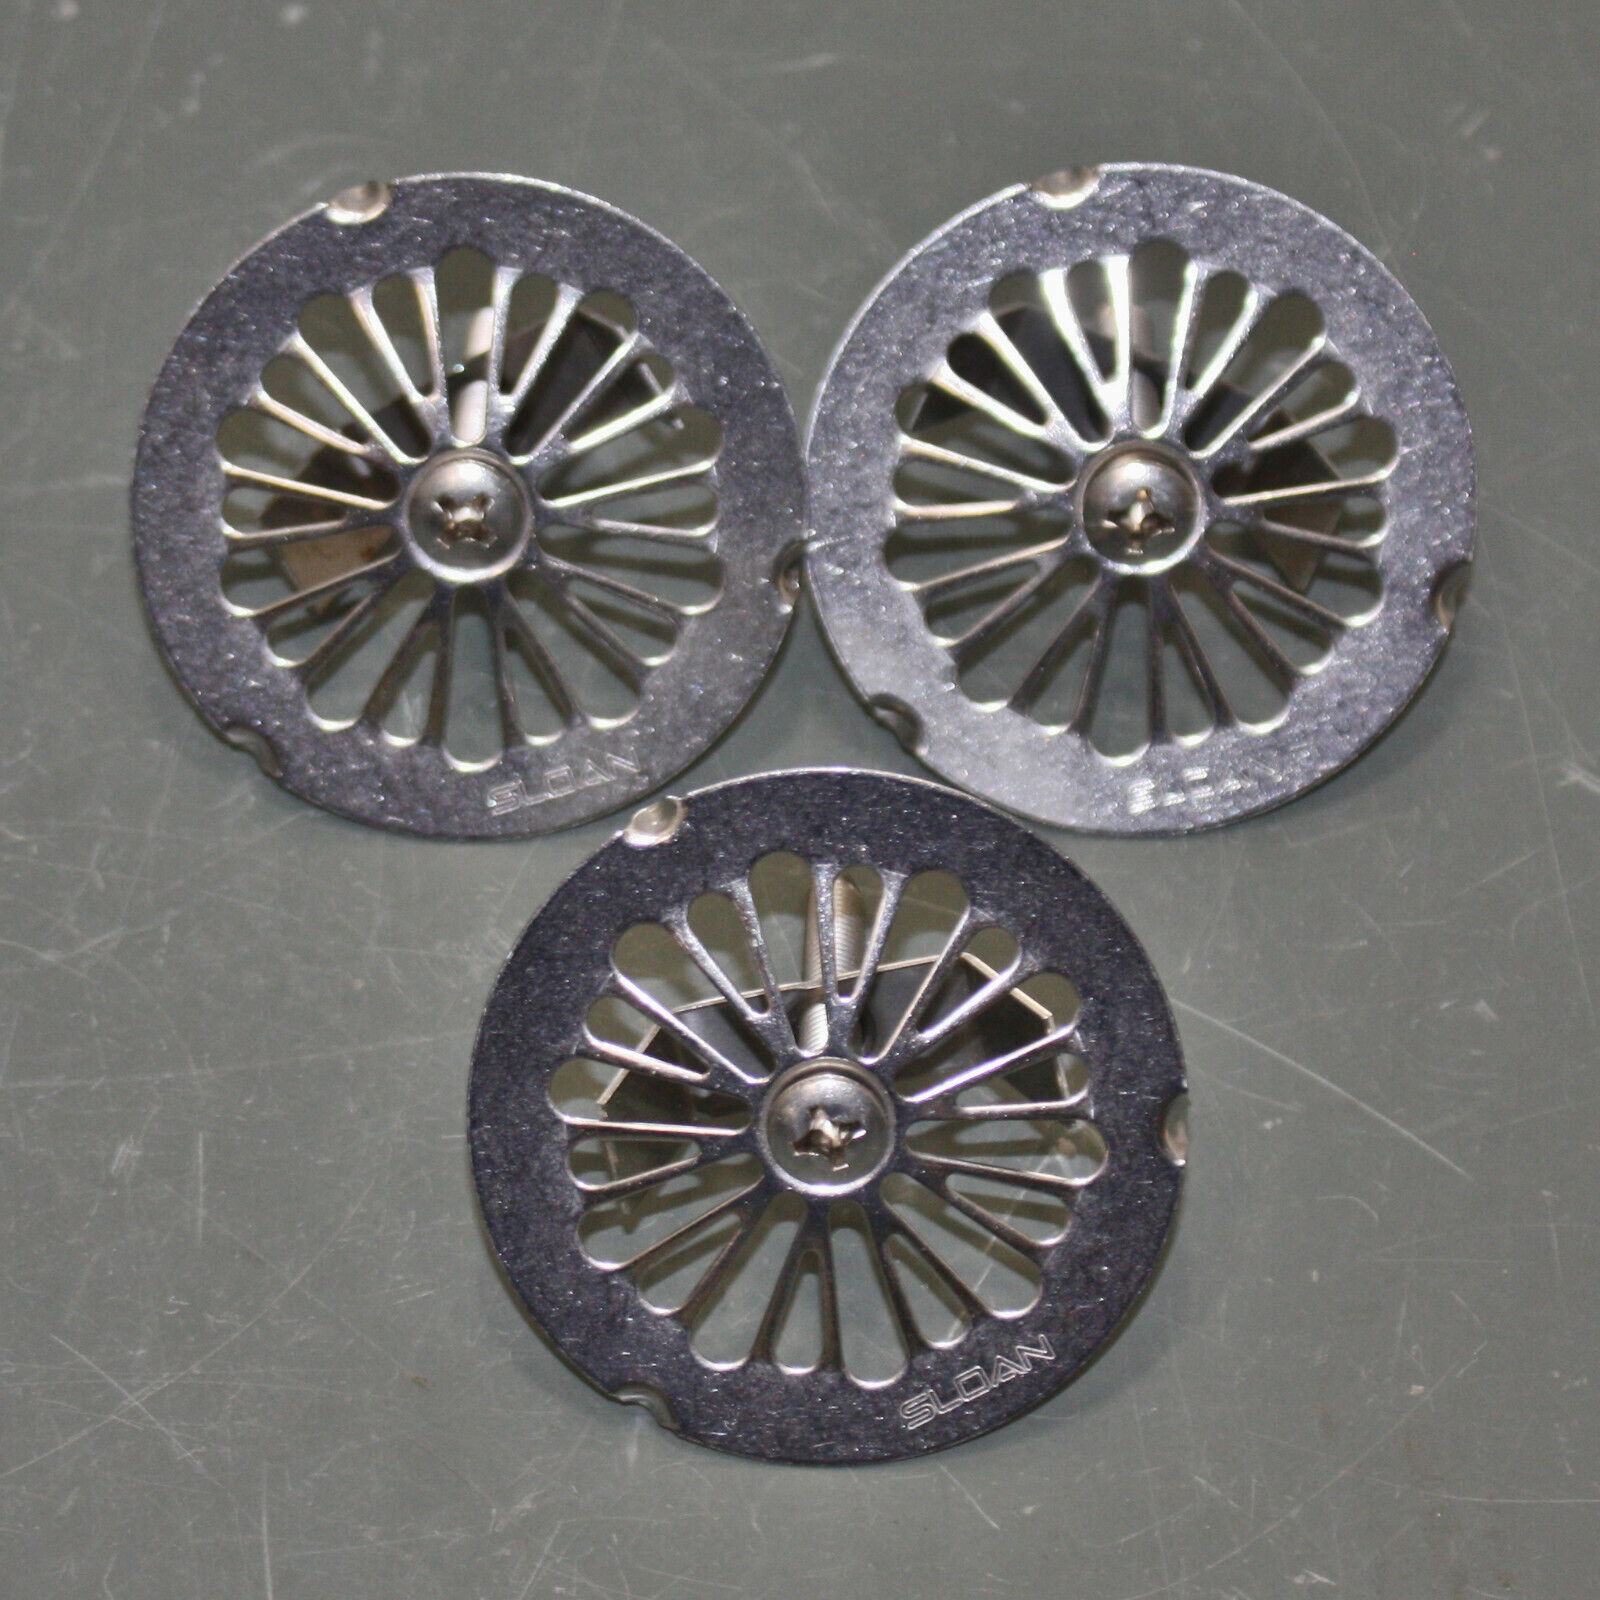 (3) Sloan Replacement Urinal Strainer Assembly 0319300, 2-3/4" Metal Drain Cover